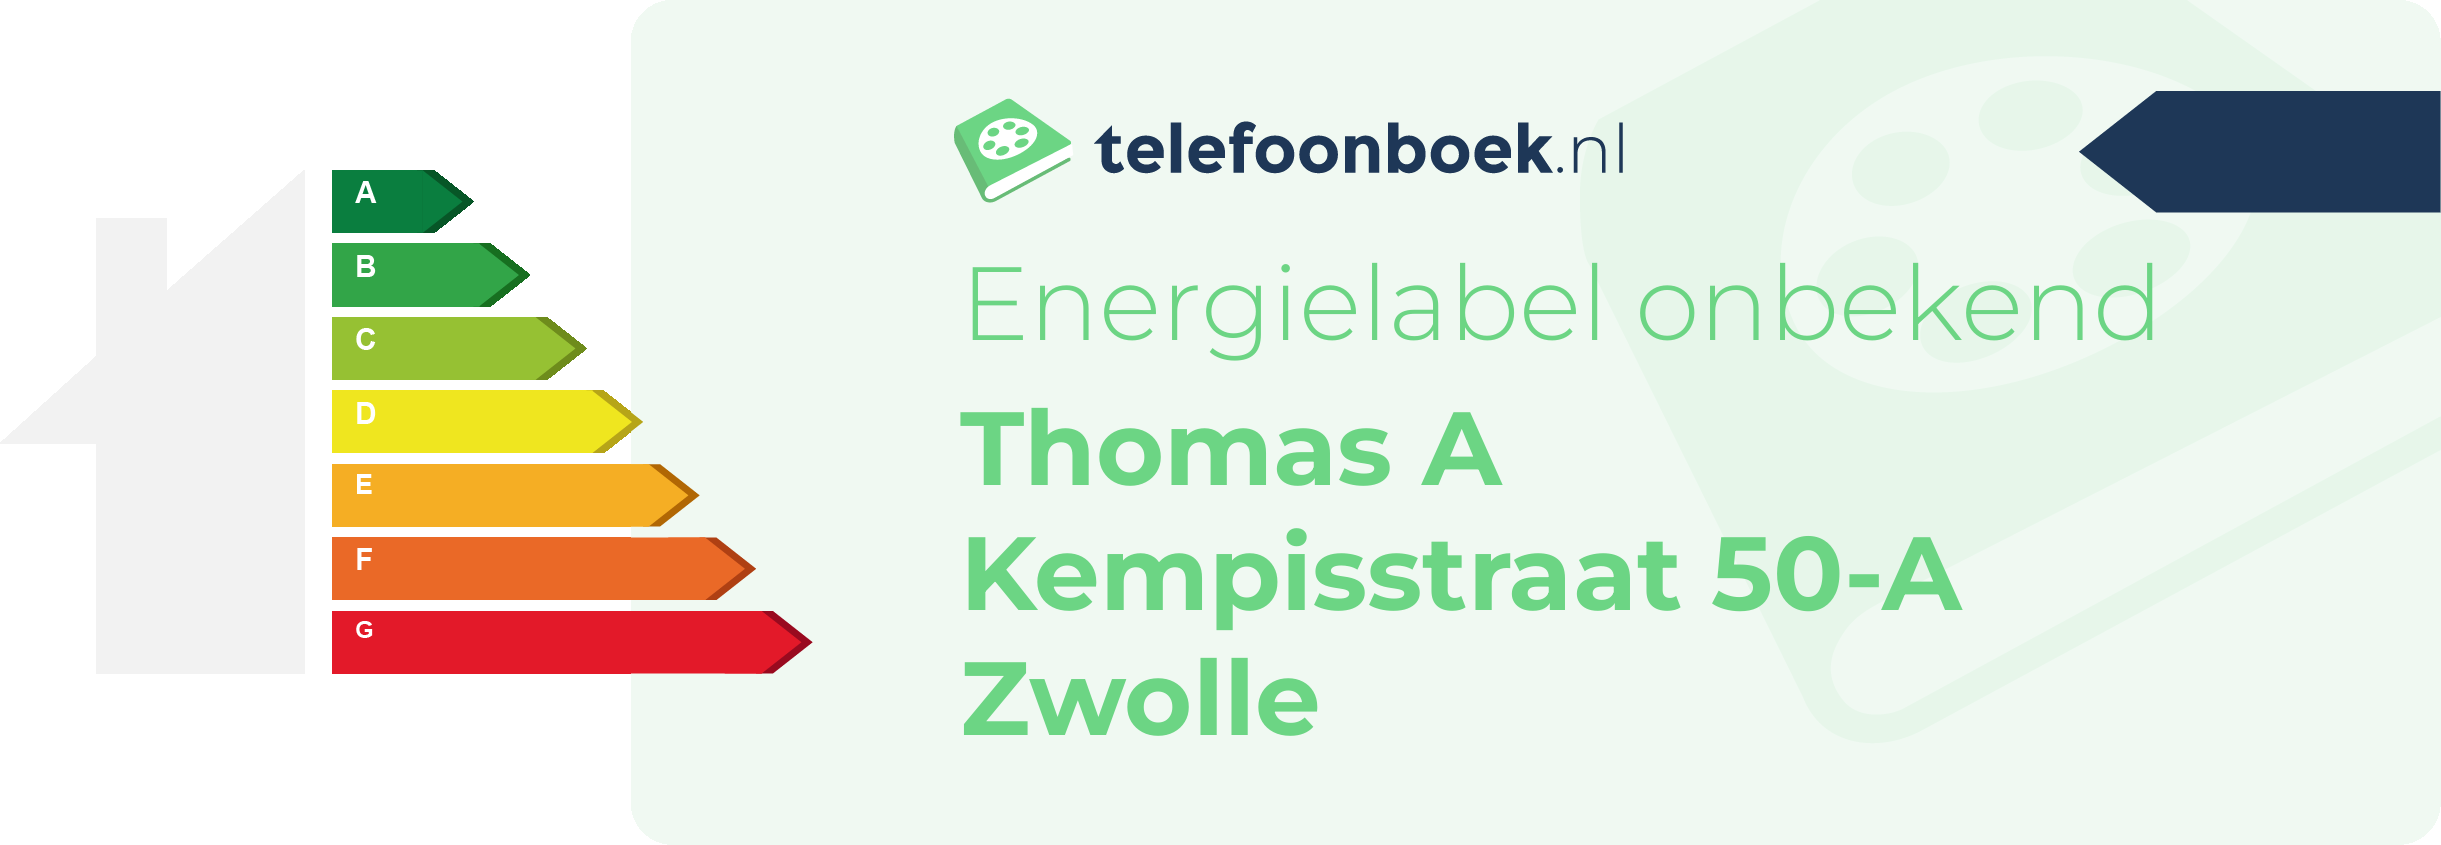 Energielabel Thomas A Kempisstraat 50-A Zwolle